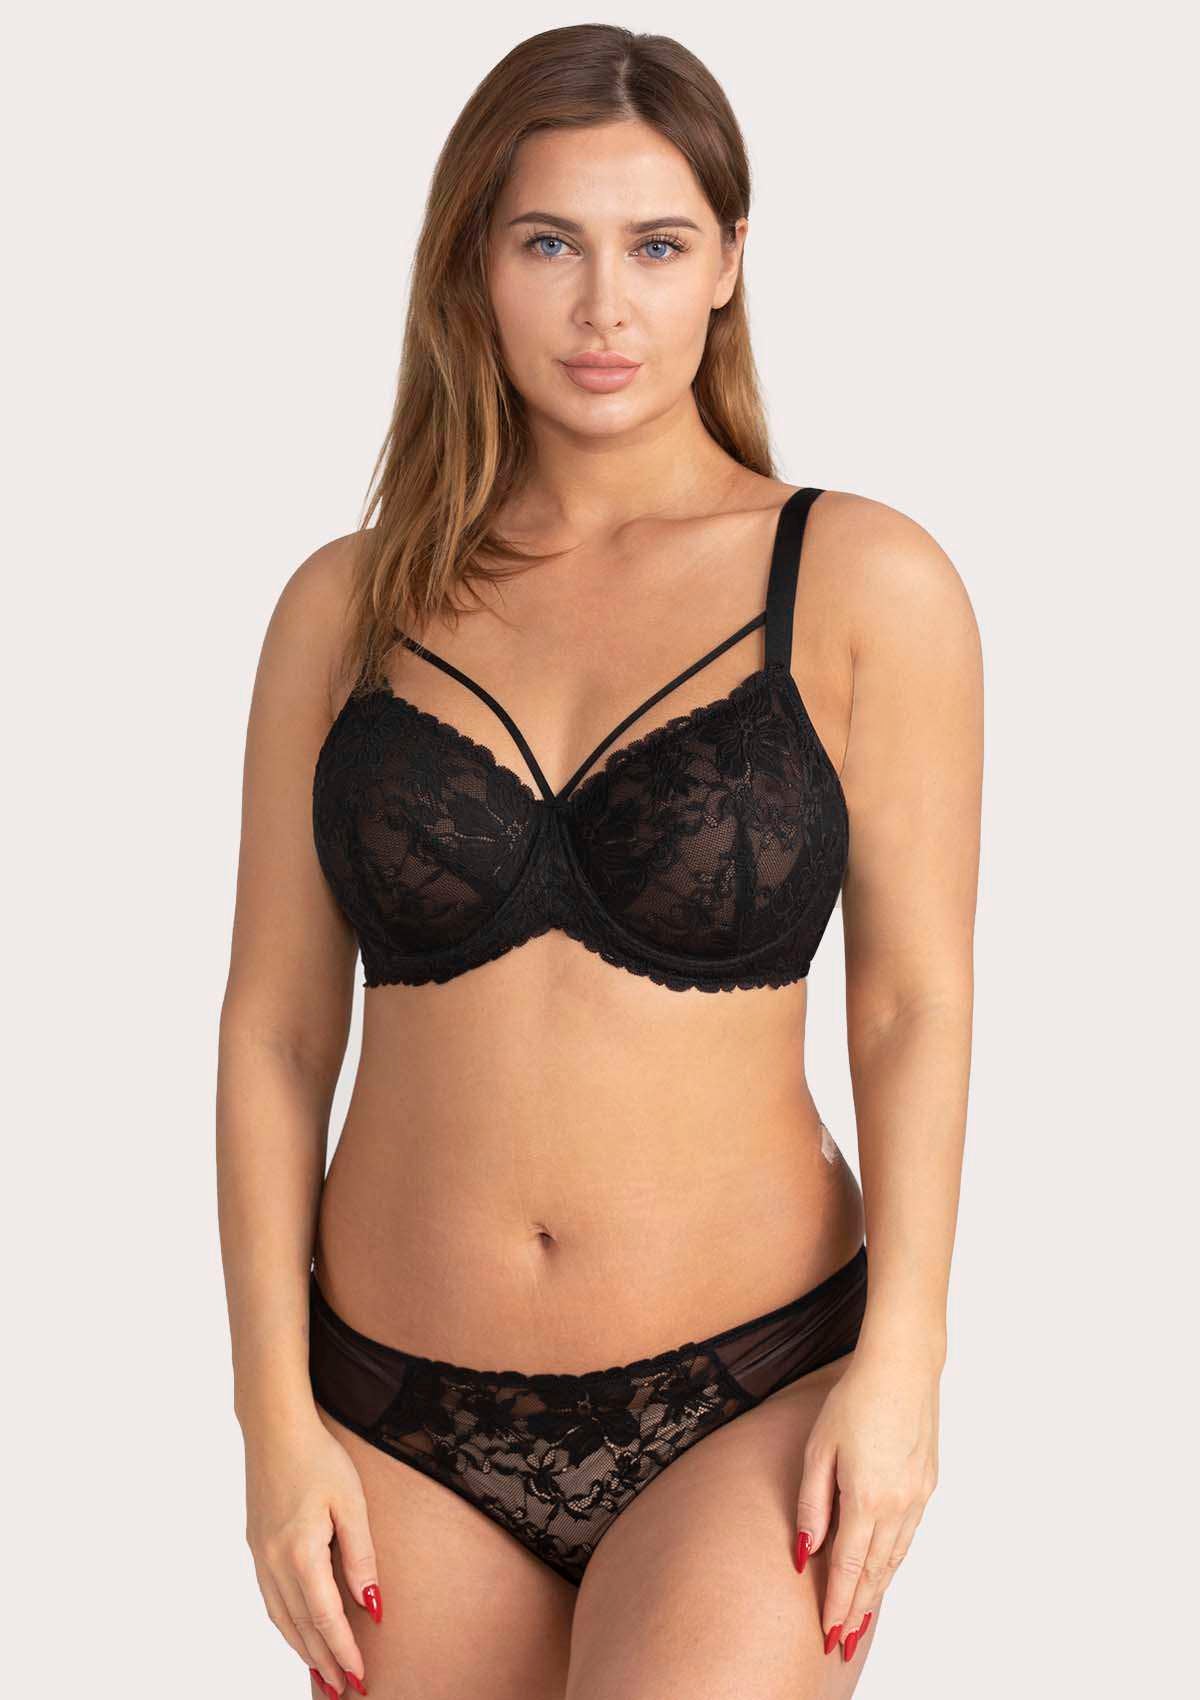 HSIA Pretty In Petals Lace Bra And Panty Set: Non Padded Wired Bra - Black / 44 / DDD/F